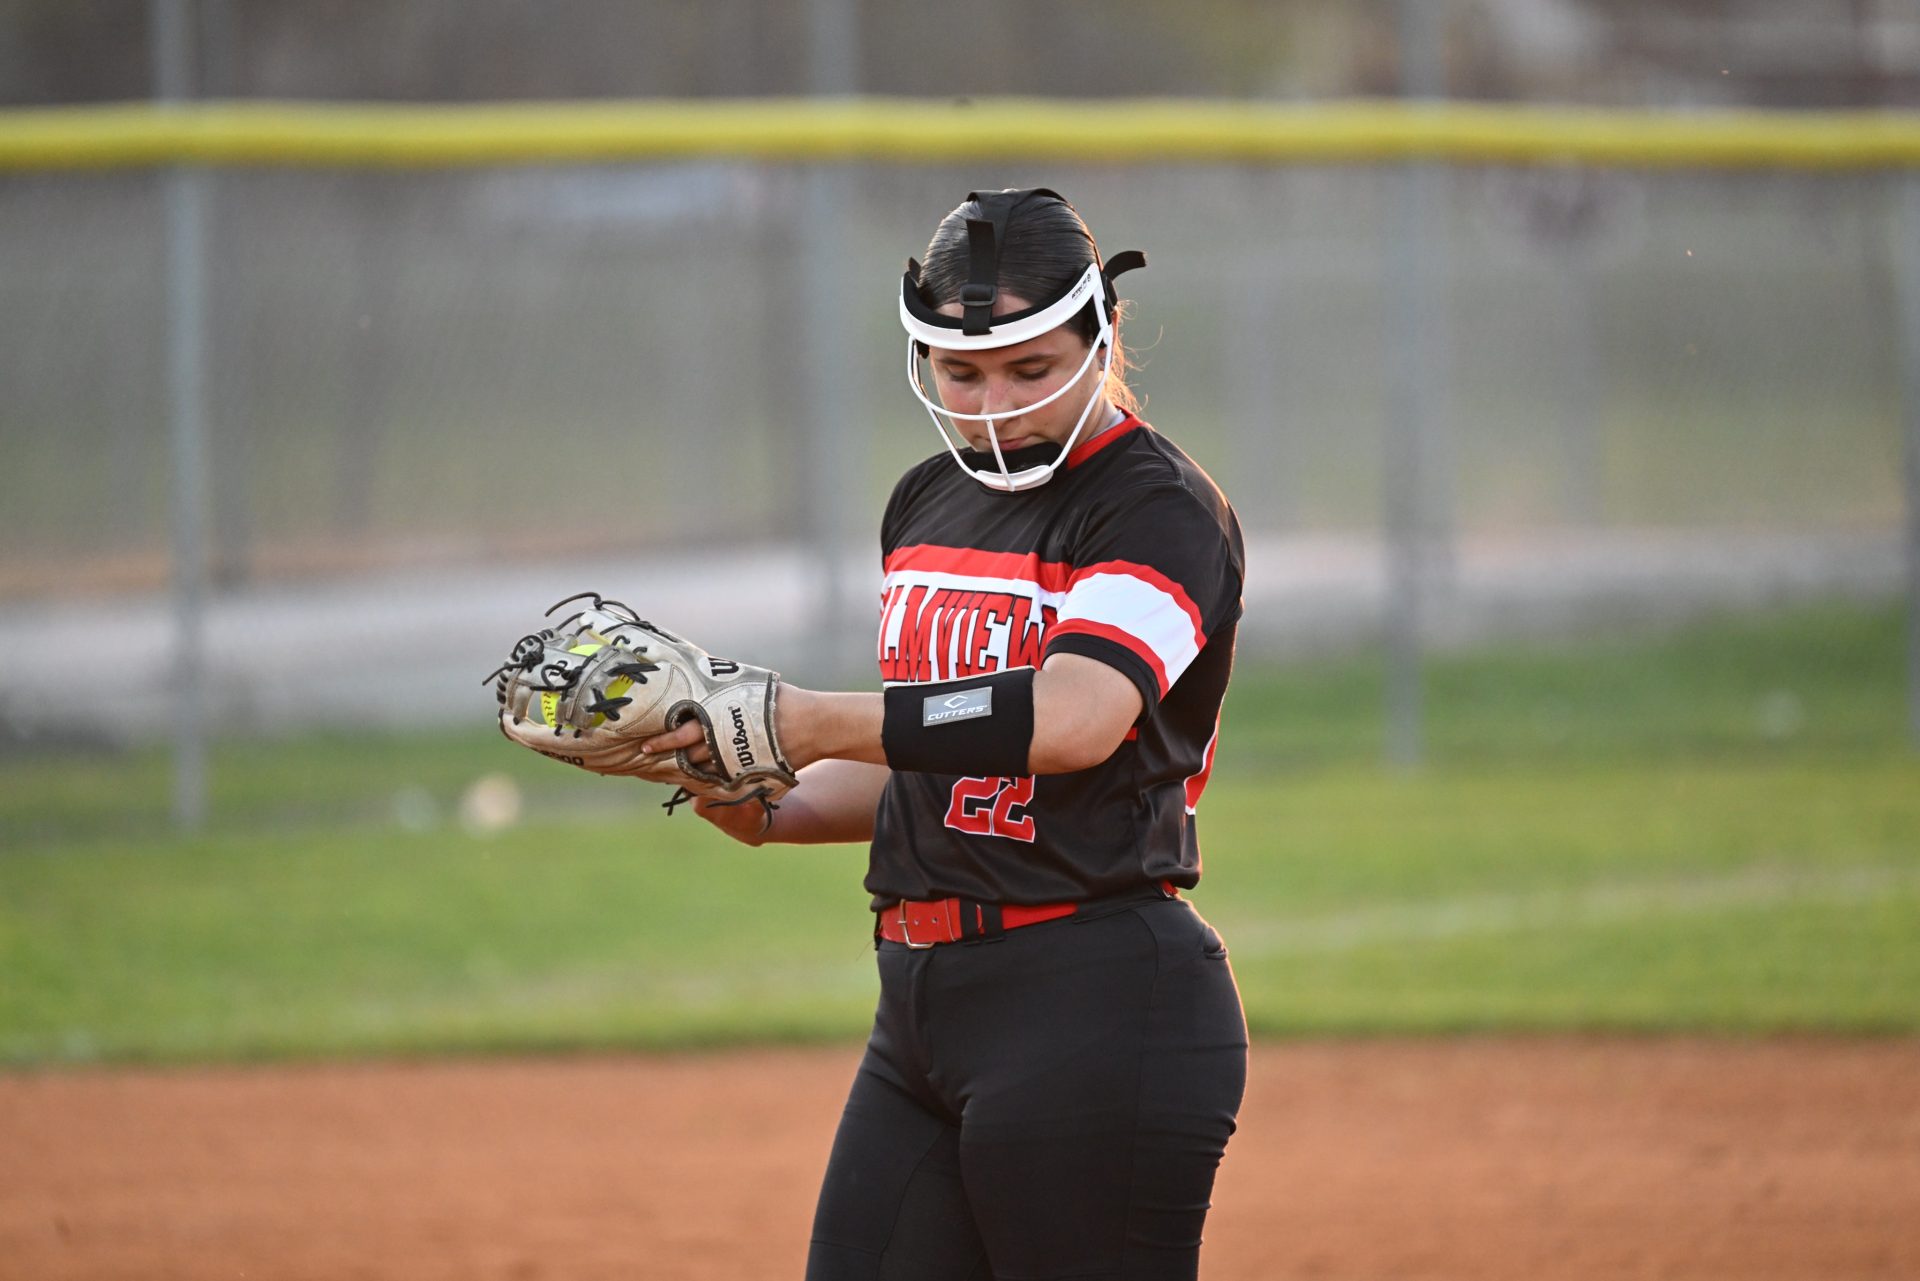 Lobos shut out Patriots as Arianna Alaniz fans 13, most K’s in nation on MaxPreps